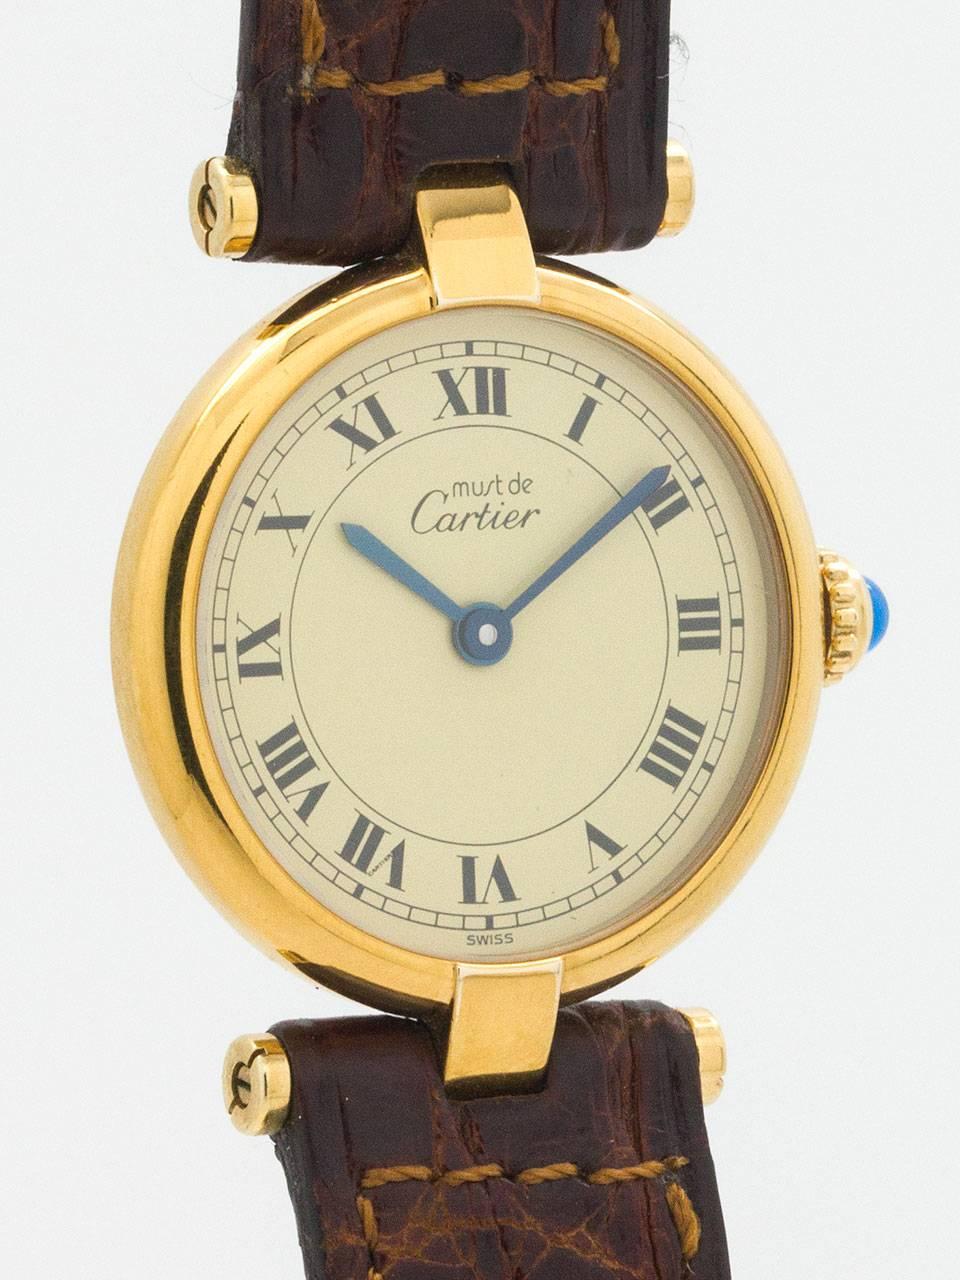 Cartier Lady’s Vermeil Vendome Tank Must de Cartier circa 1990s. 24.5 x 30mm round case with “T bar” lugs and acrylic crystal. Classic cream dial with black roman numerals, blue steeled hand, and blue cabochon sapphire crown. Battery powered quartz